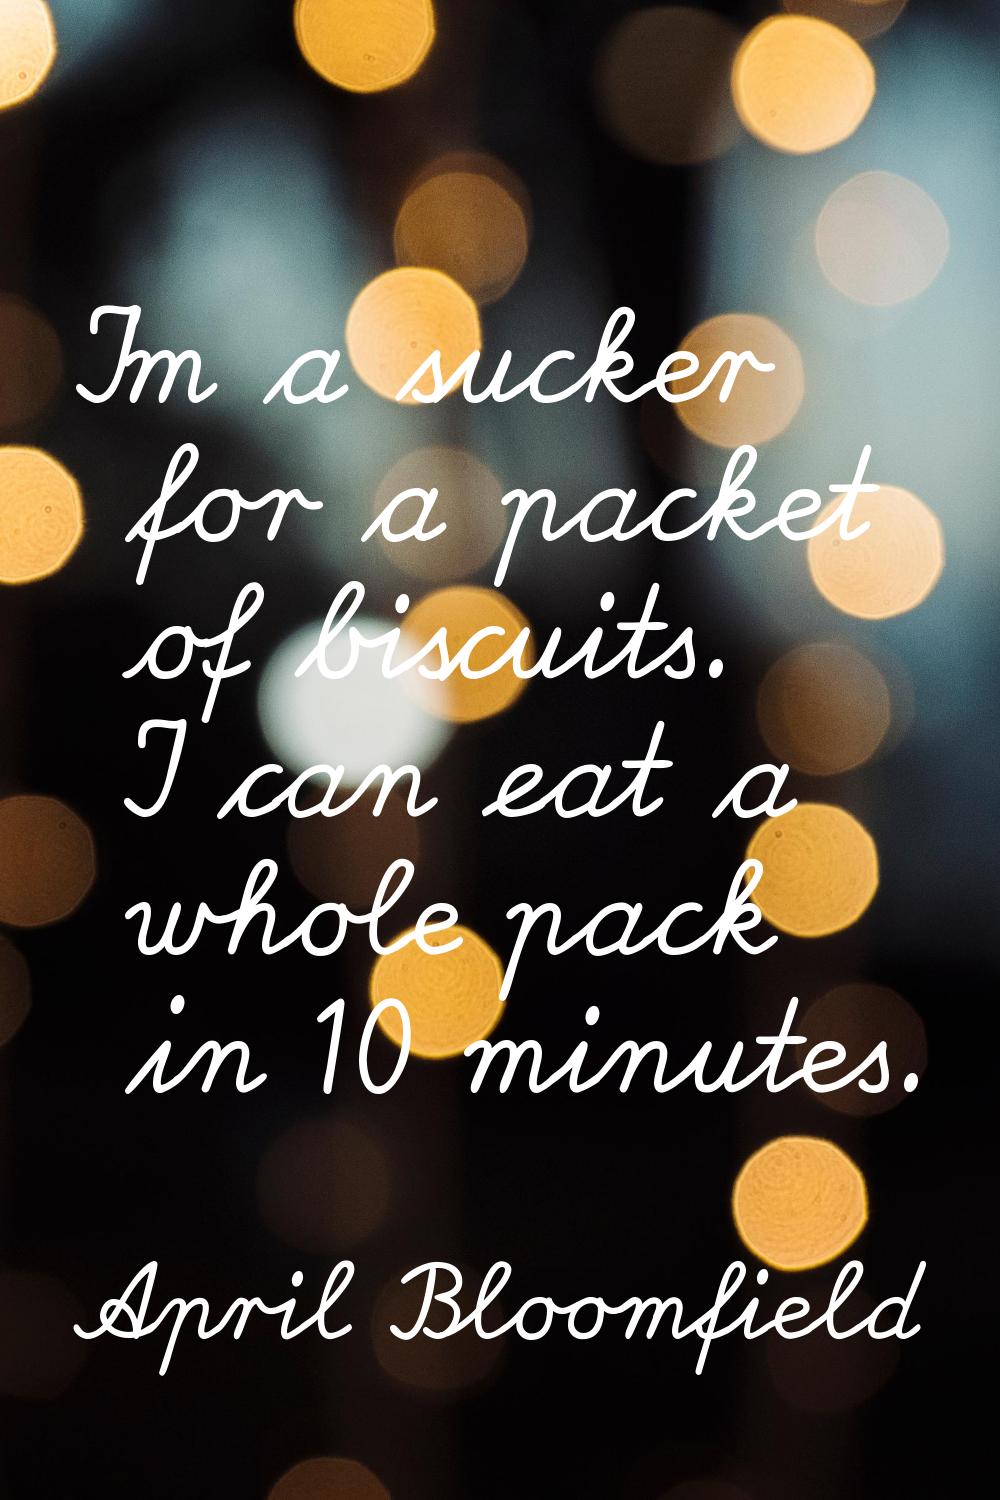 I'm a sucker for a packet of biscuits. I can eat a whole pack in 10 minutes.